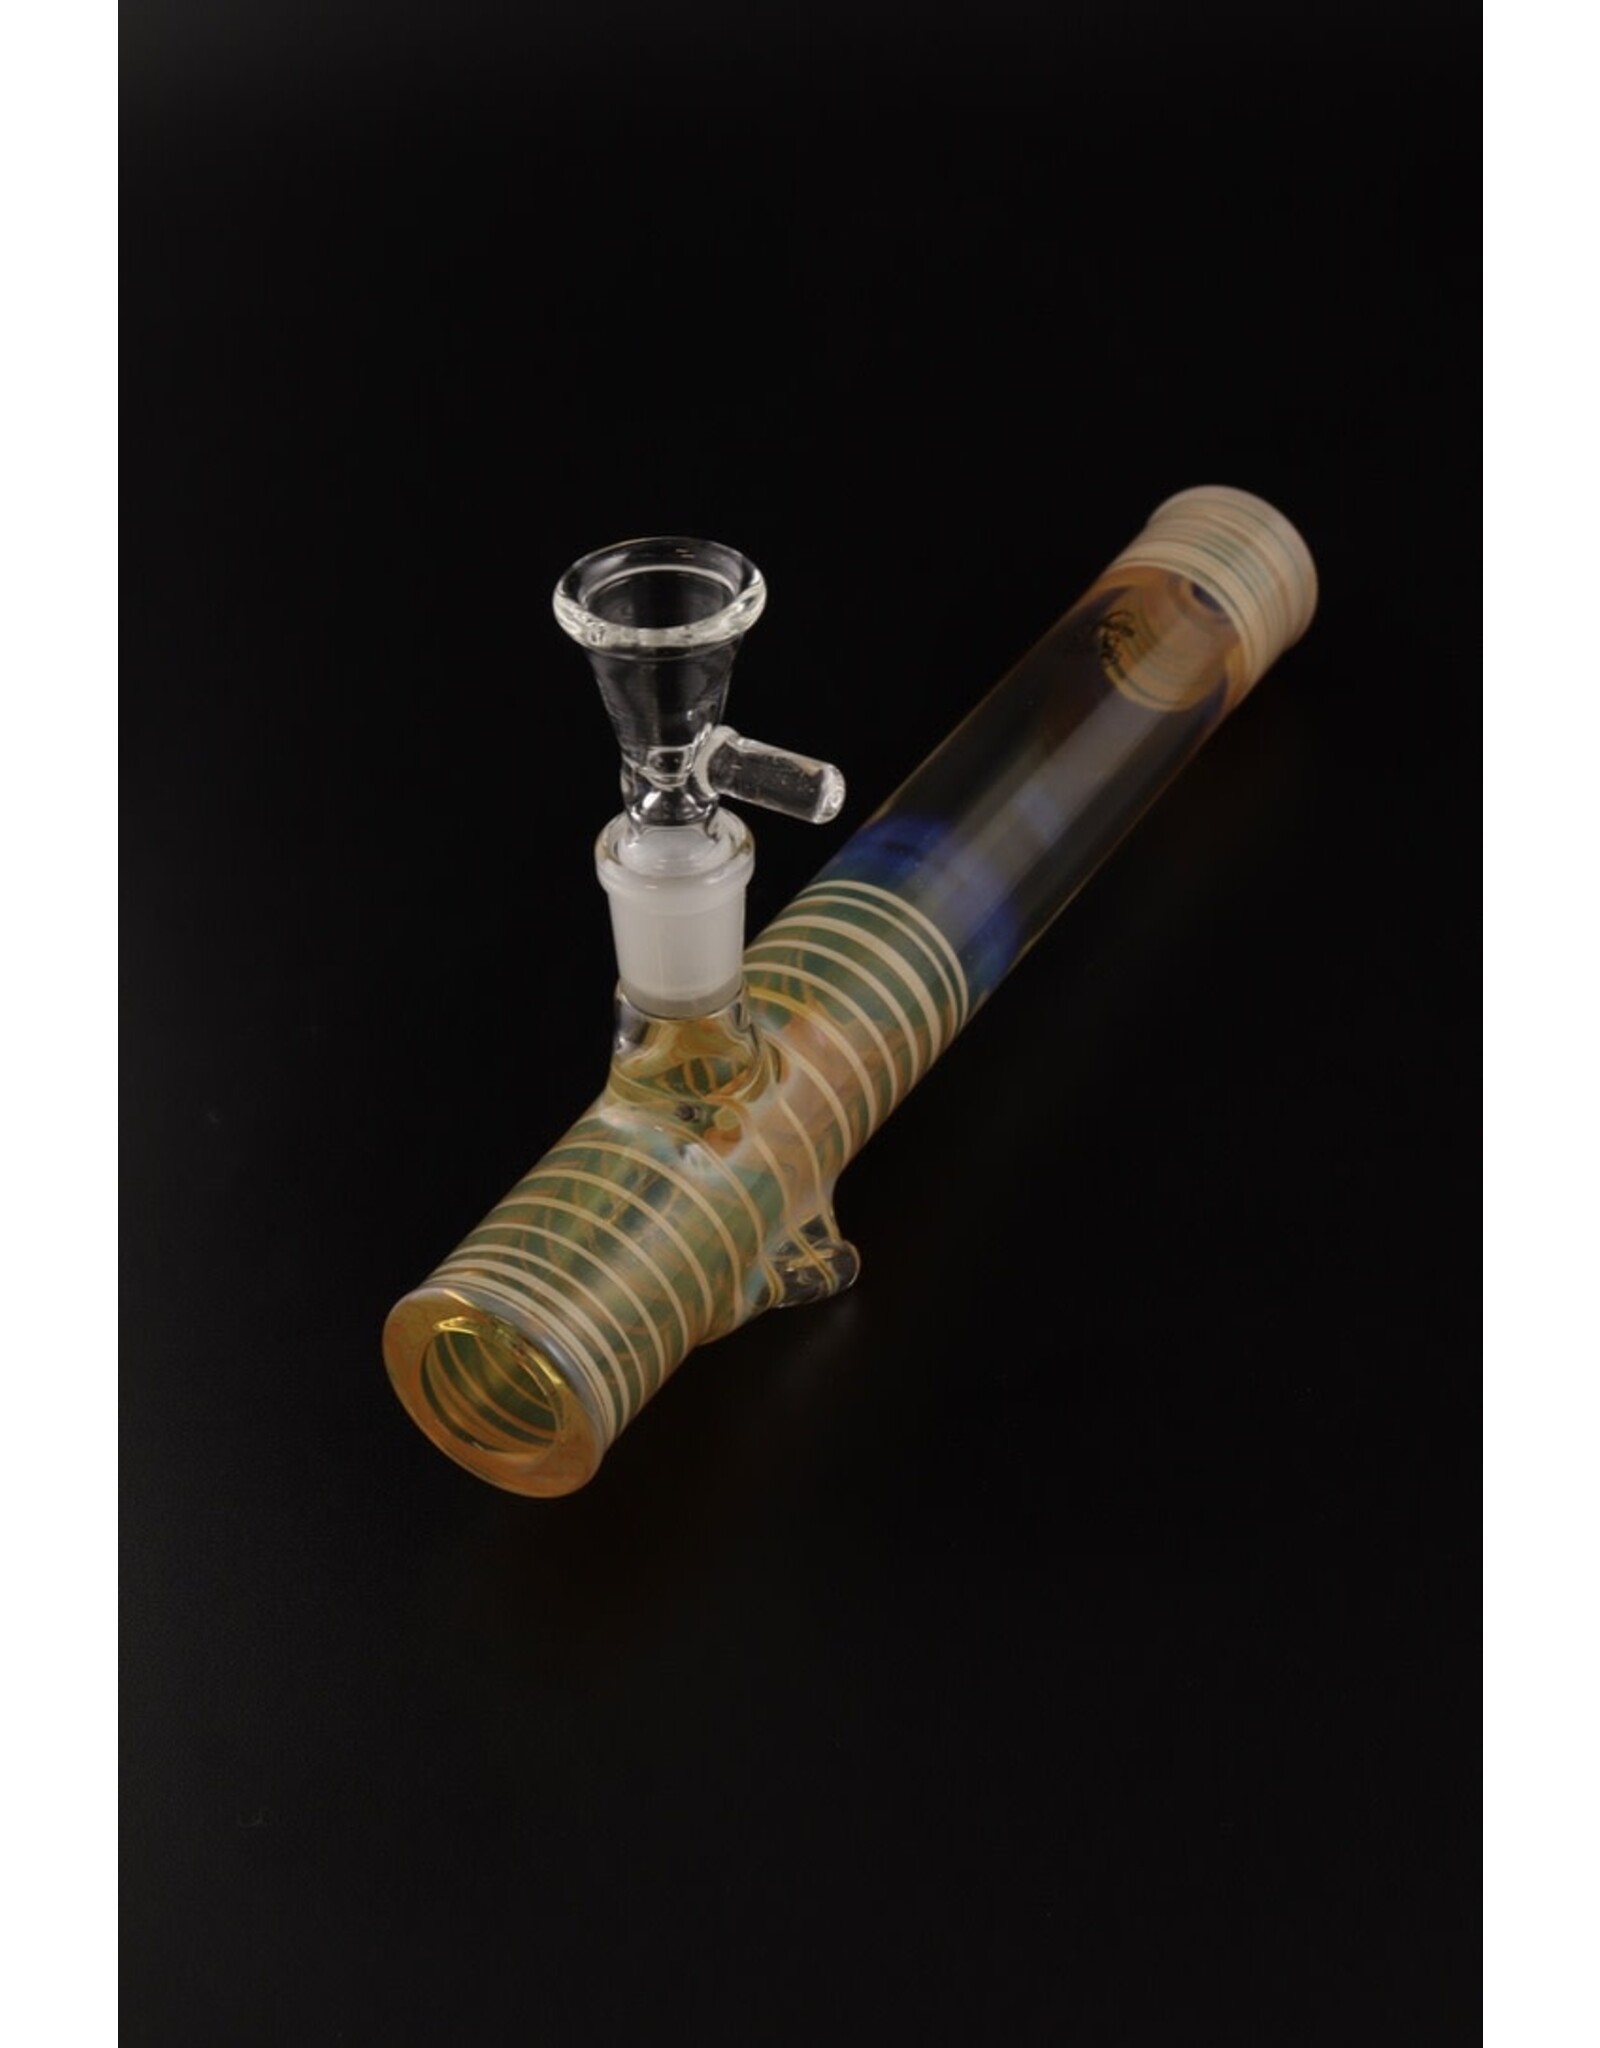 Glowfly Glass 32mm 9 Inch Steamroller w/ 14mm GonG Bowl Joint